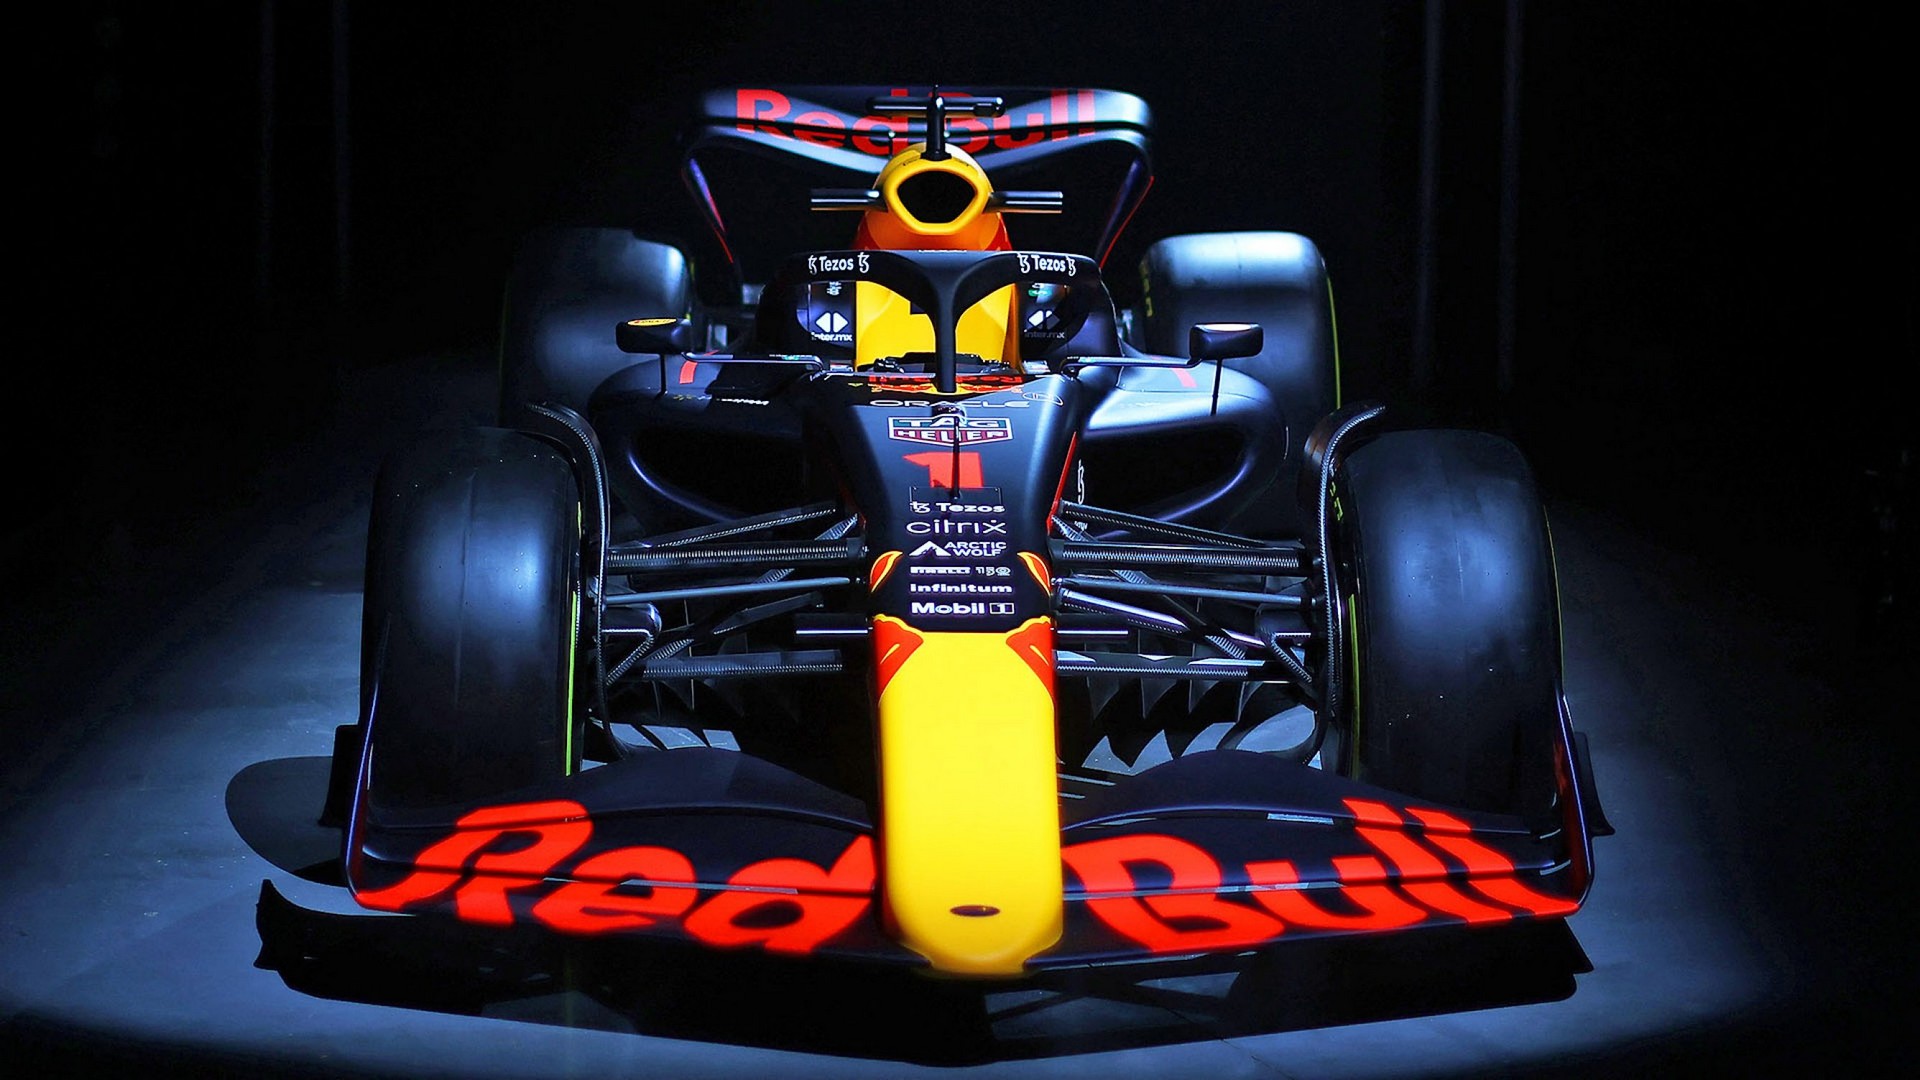 vandfald smuk ingeniørarbejde Ford To Announce F1 Return With Red Bull Racing From 2026 | Carscoops